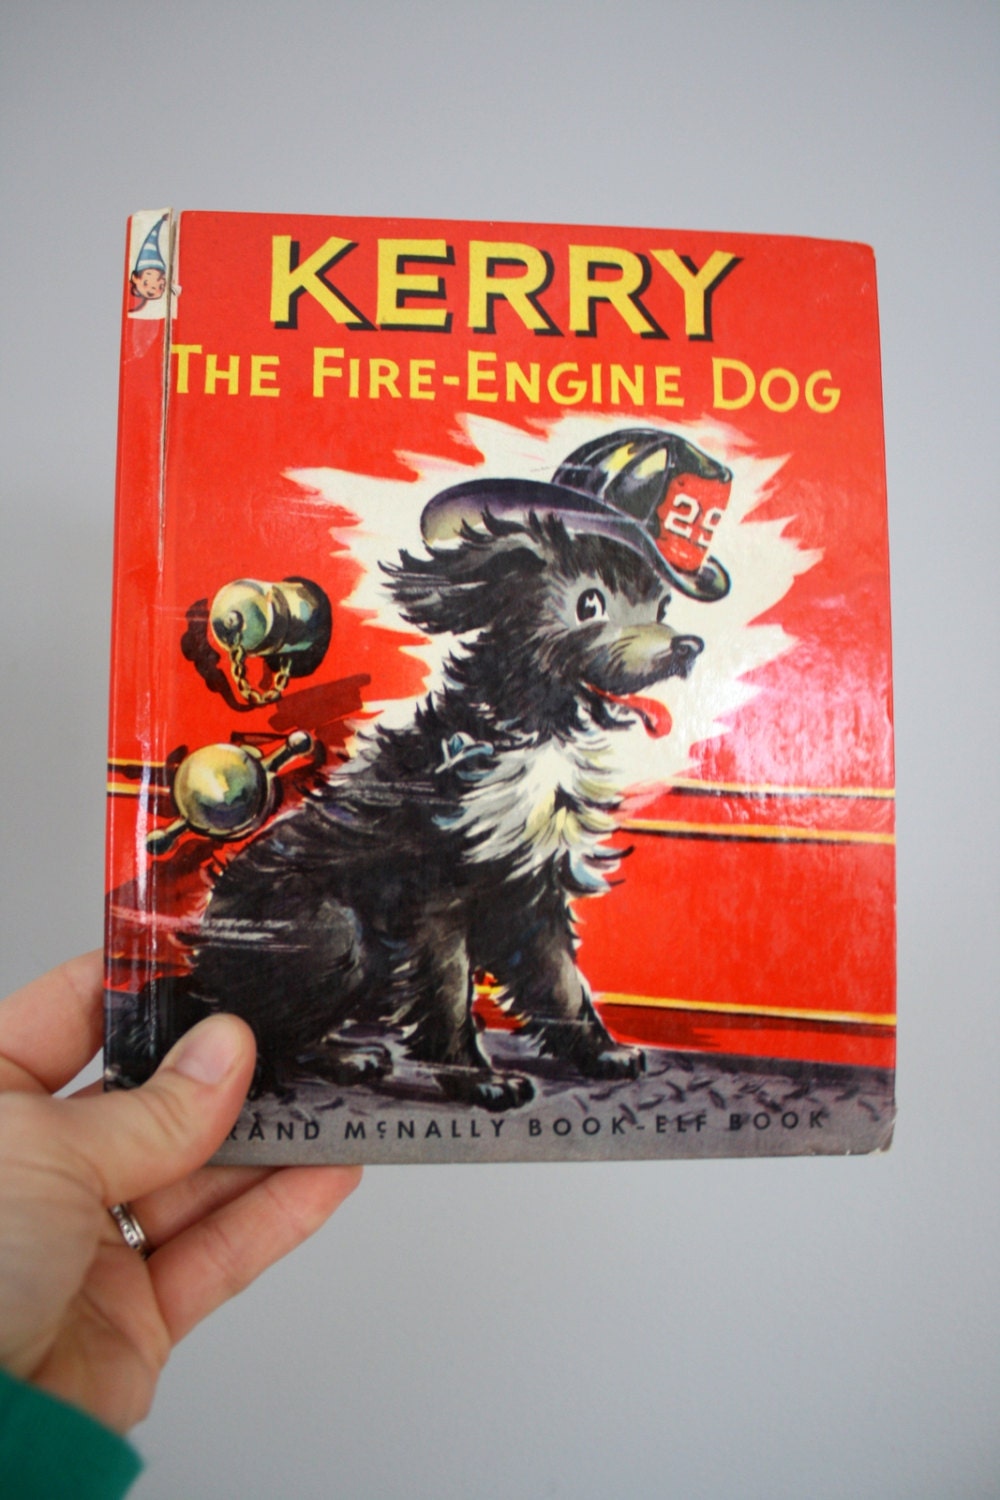 KERRY THE FIRE-ENGINE DOG Frank Lewis and Alfred Corchia and Dorothy Grider